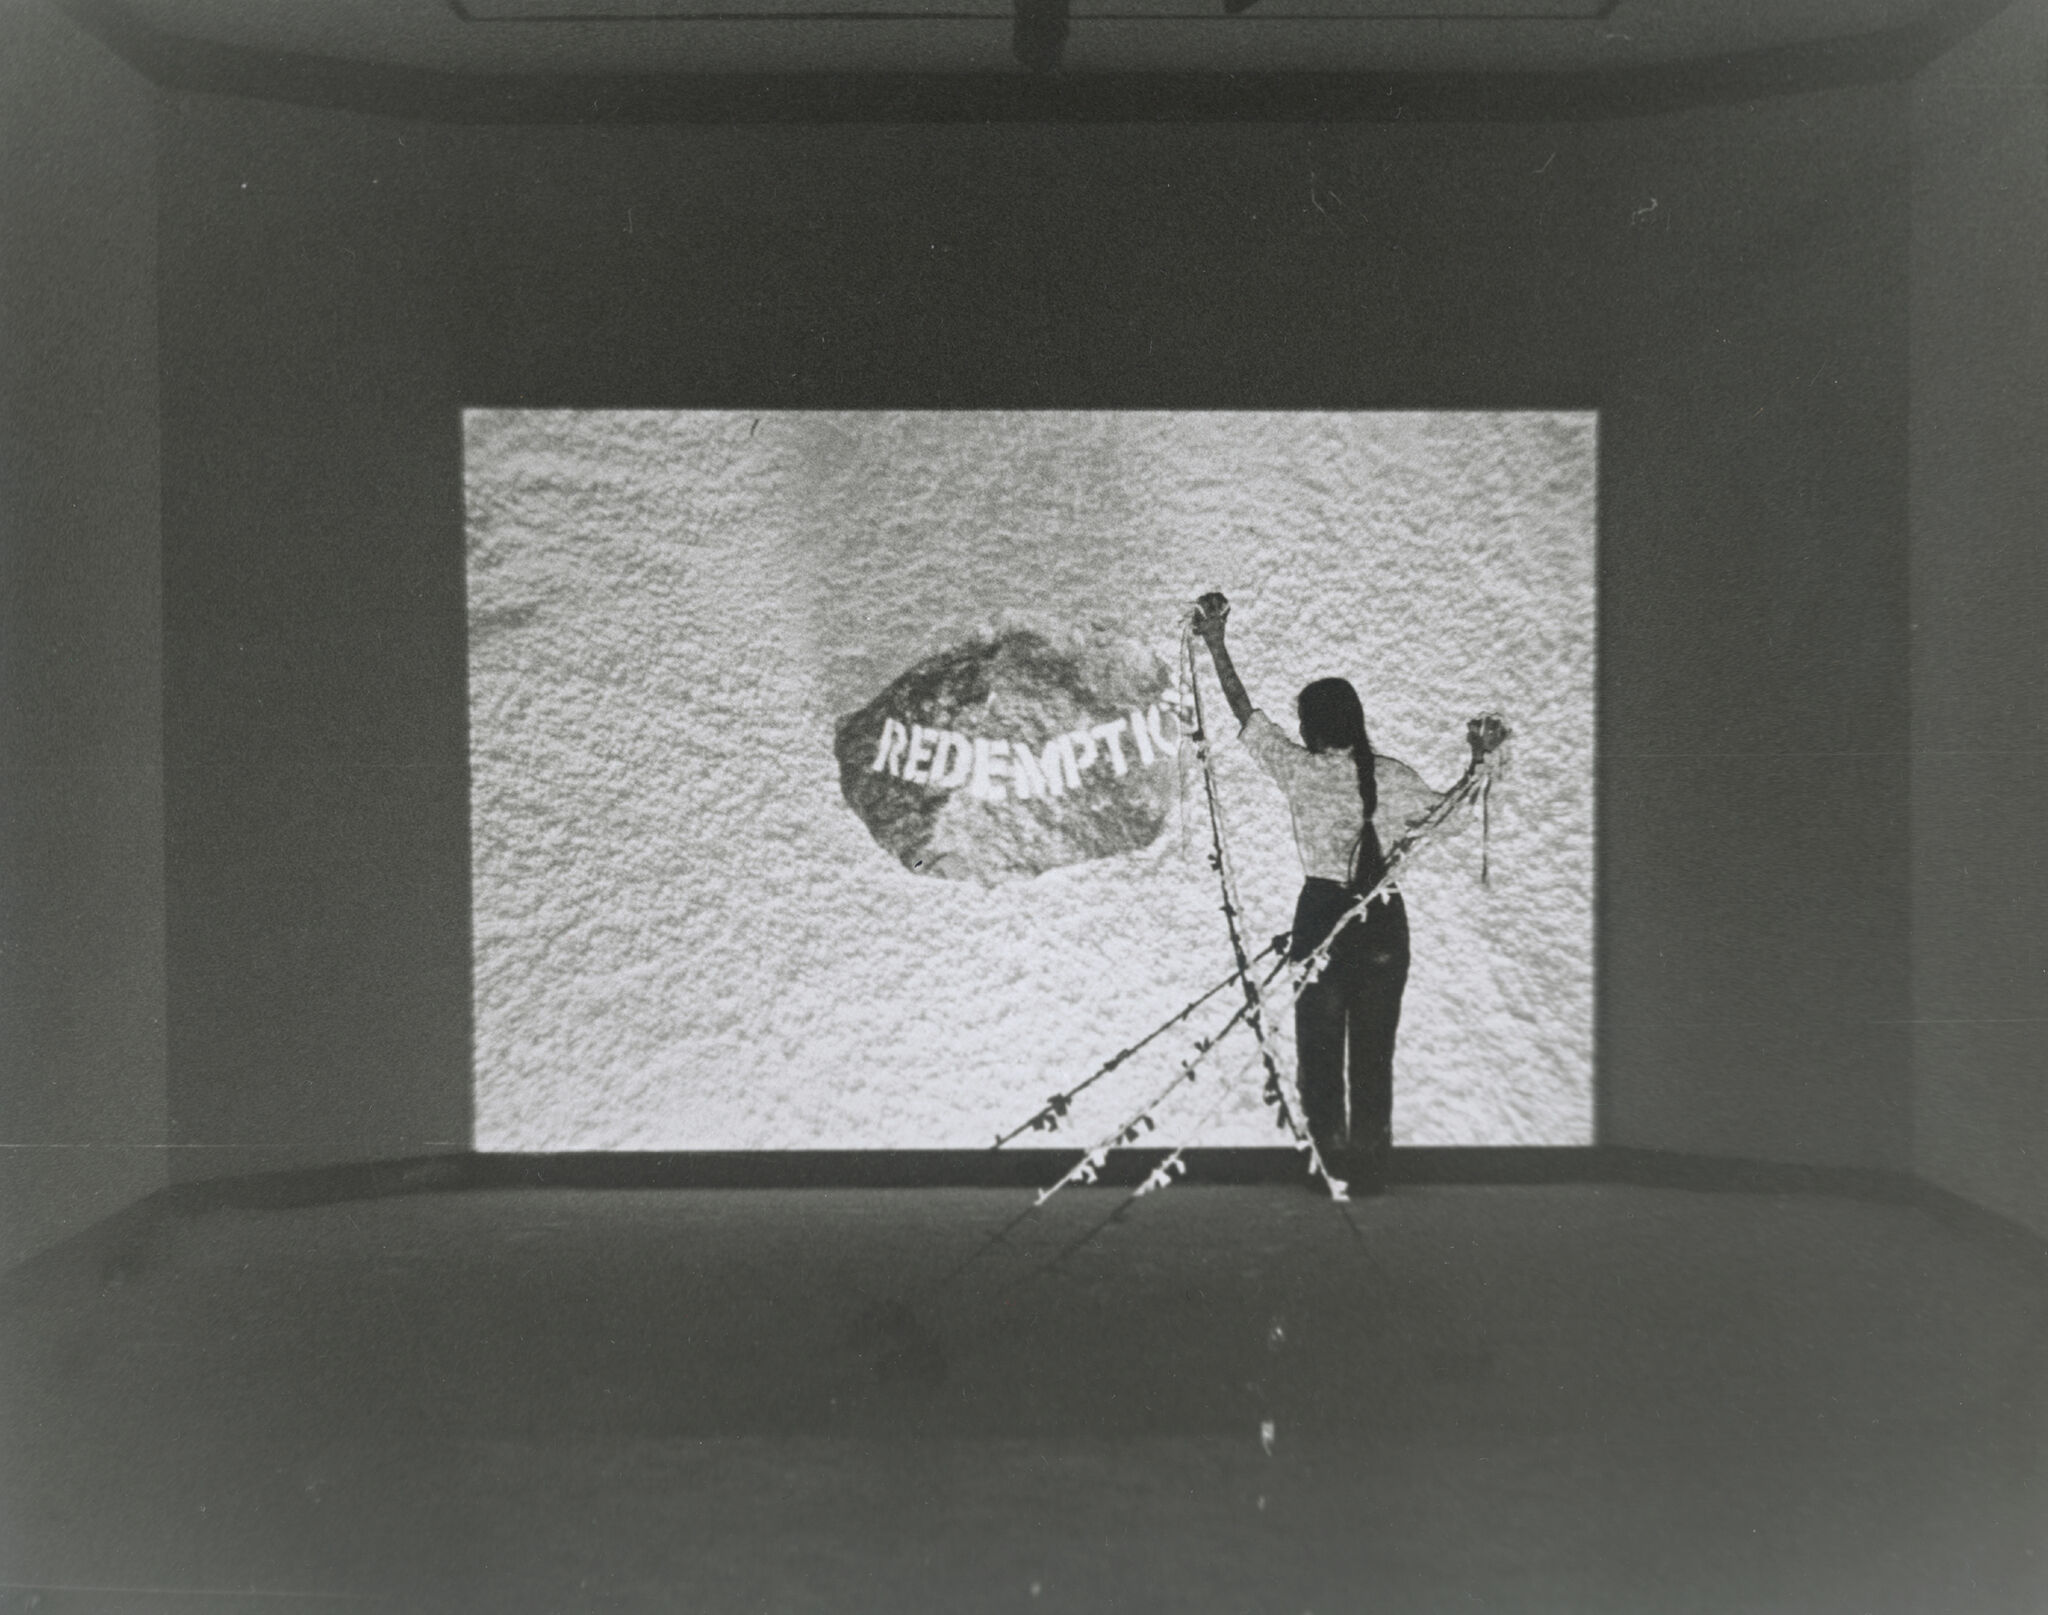 A grayscale image of a person standing in front of a projected screen. 